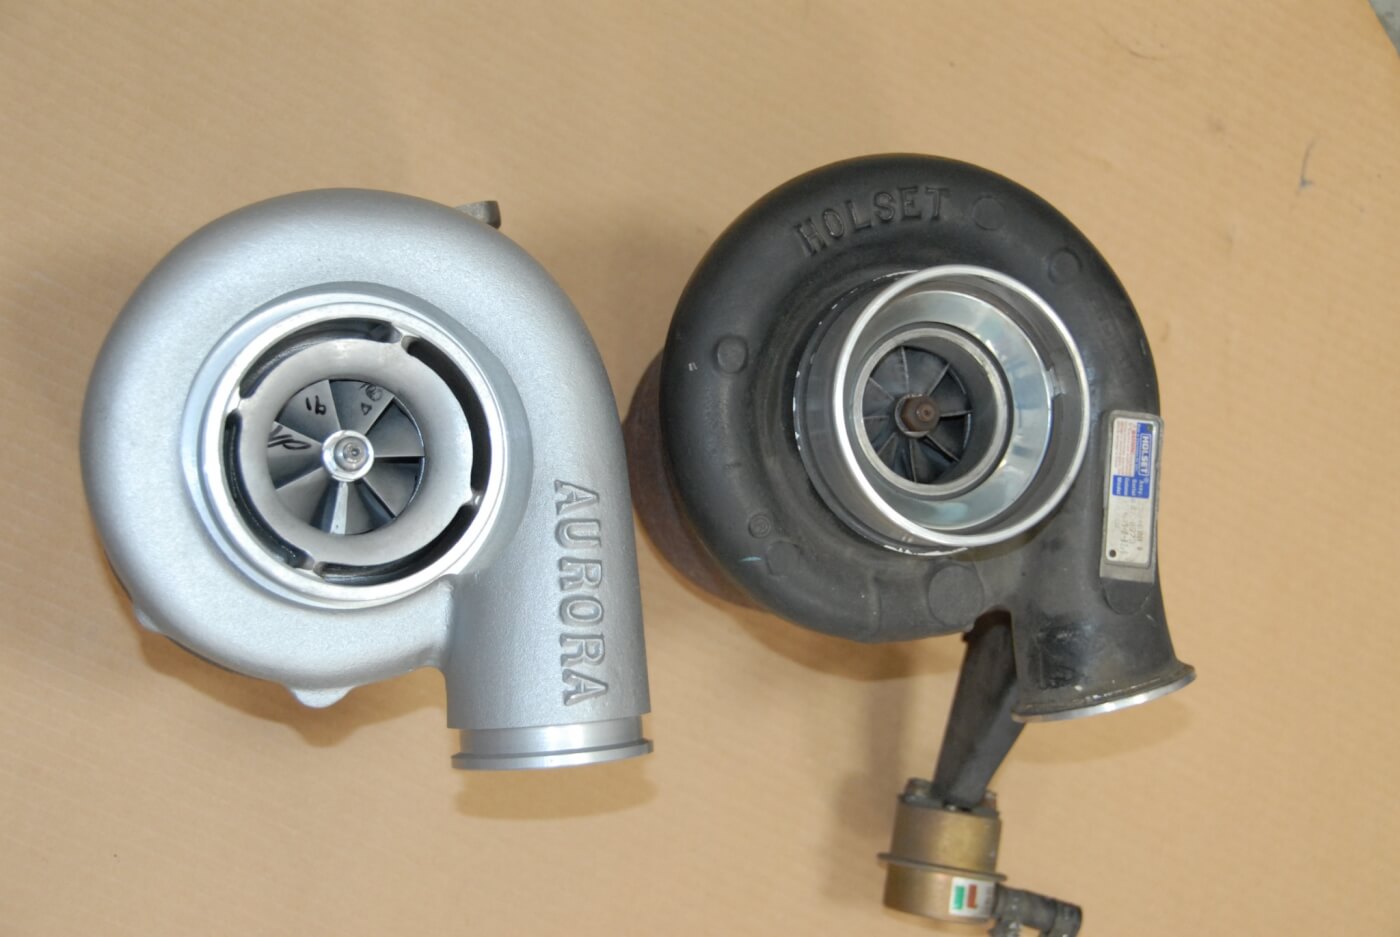 2. This close-up shows the differences between the Aurora 2000 turbo, next to the stock Holset unit. Besides the lack of a wastegate, note the larger discharge outlet on the Aurora, and slightly different exit angle, which allows air to exit more quickly from the compressor wheel. In addition, there’s an inducer or bleed ring (the gap at the perimeter) to enhance the width of the boost map. And the compressor vanes have extended tips and a steeper pitch.